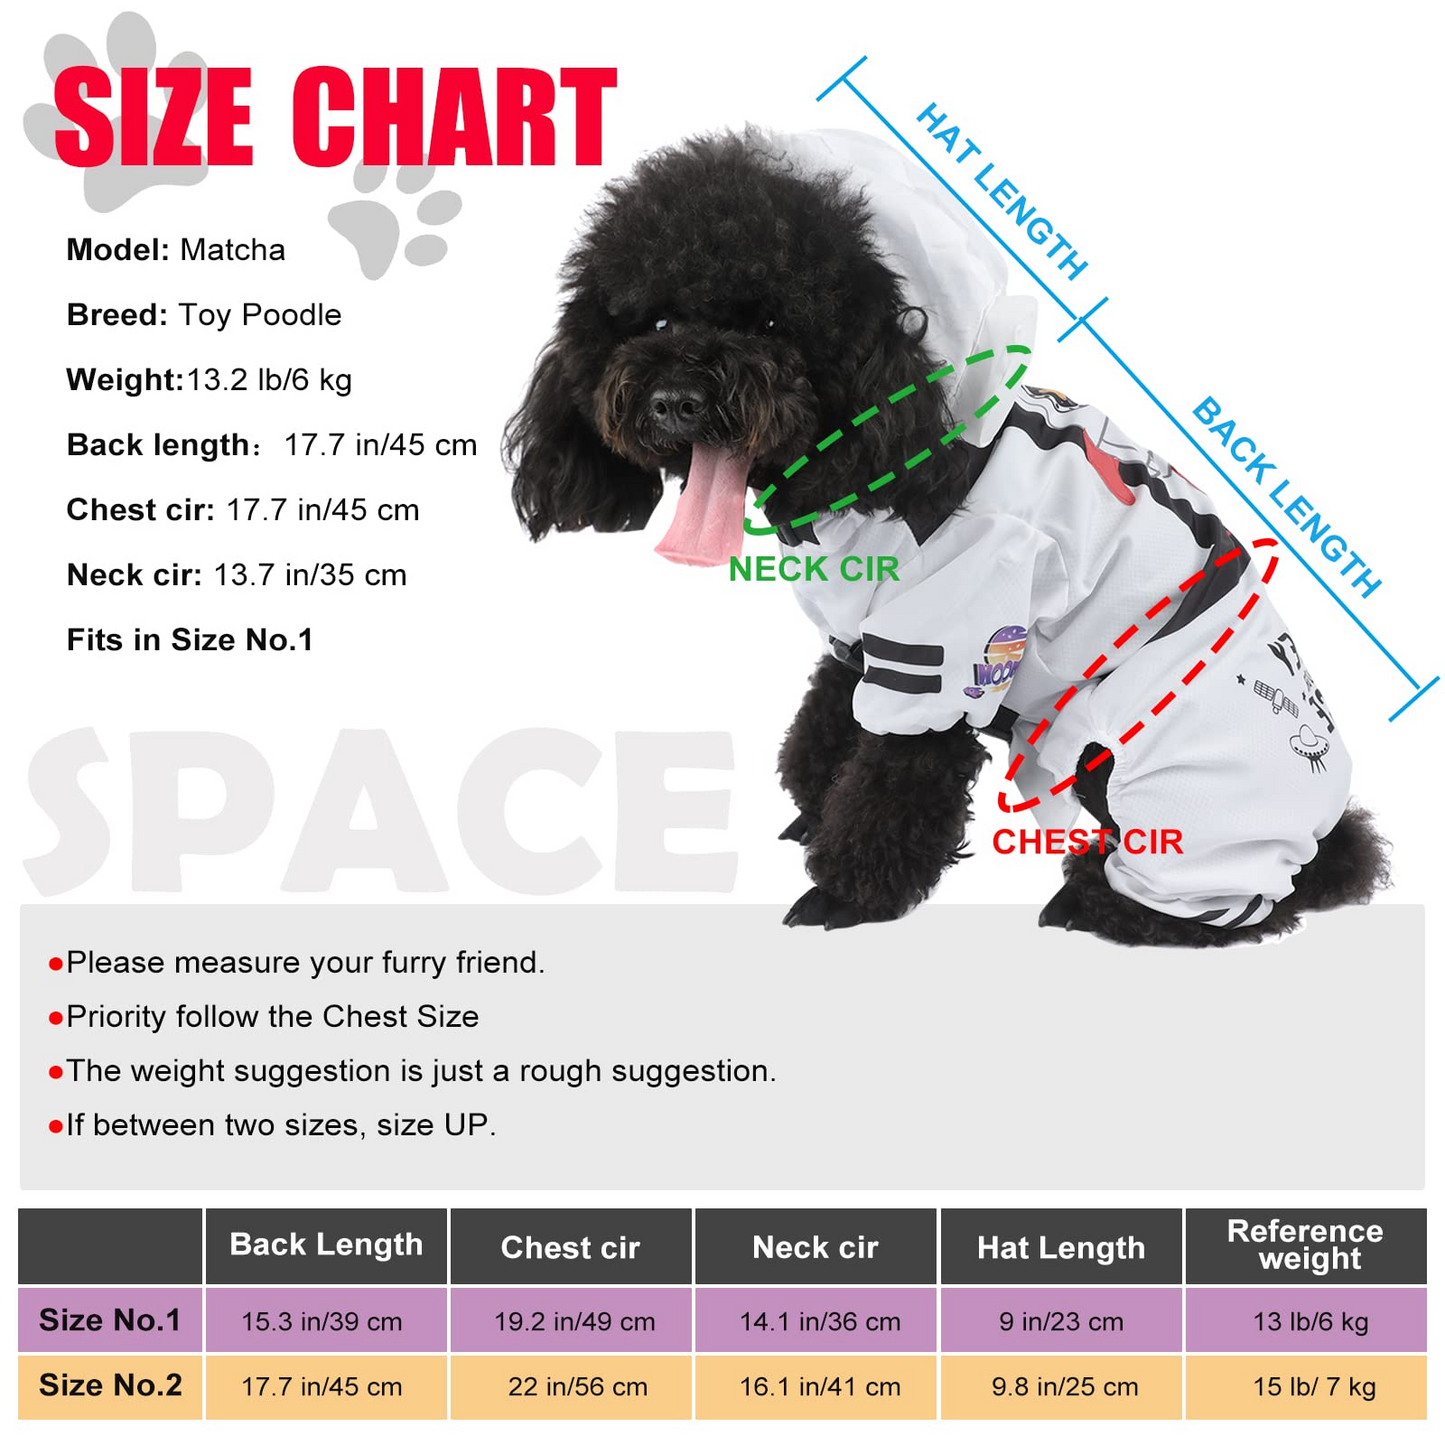 Dog Raincoats with Reflective for Small Dogs Cats -Waterproof, Lightweight, Breathable, Stylish -Space Astronaut Dog Costume with Leash Hole